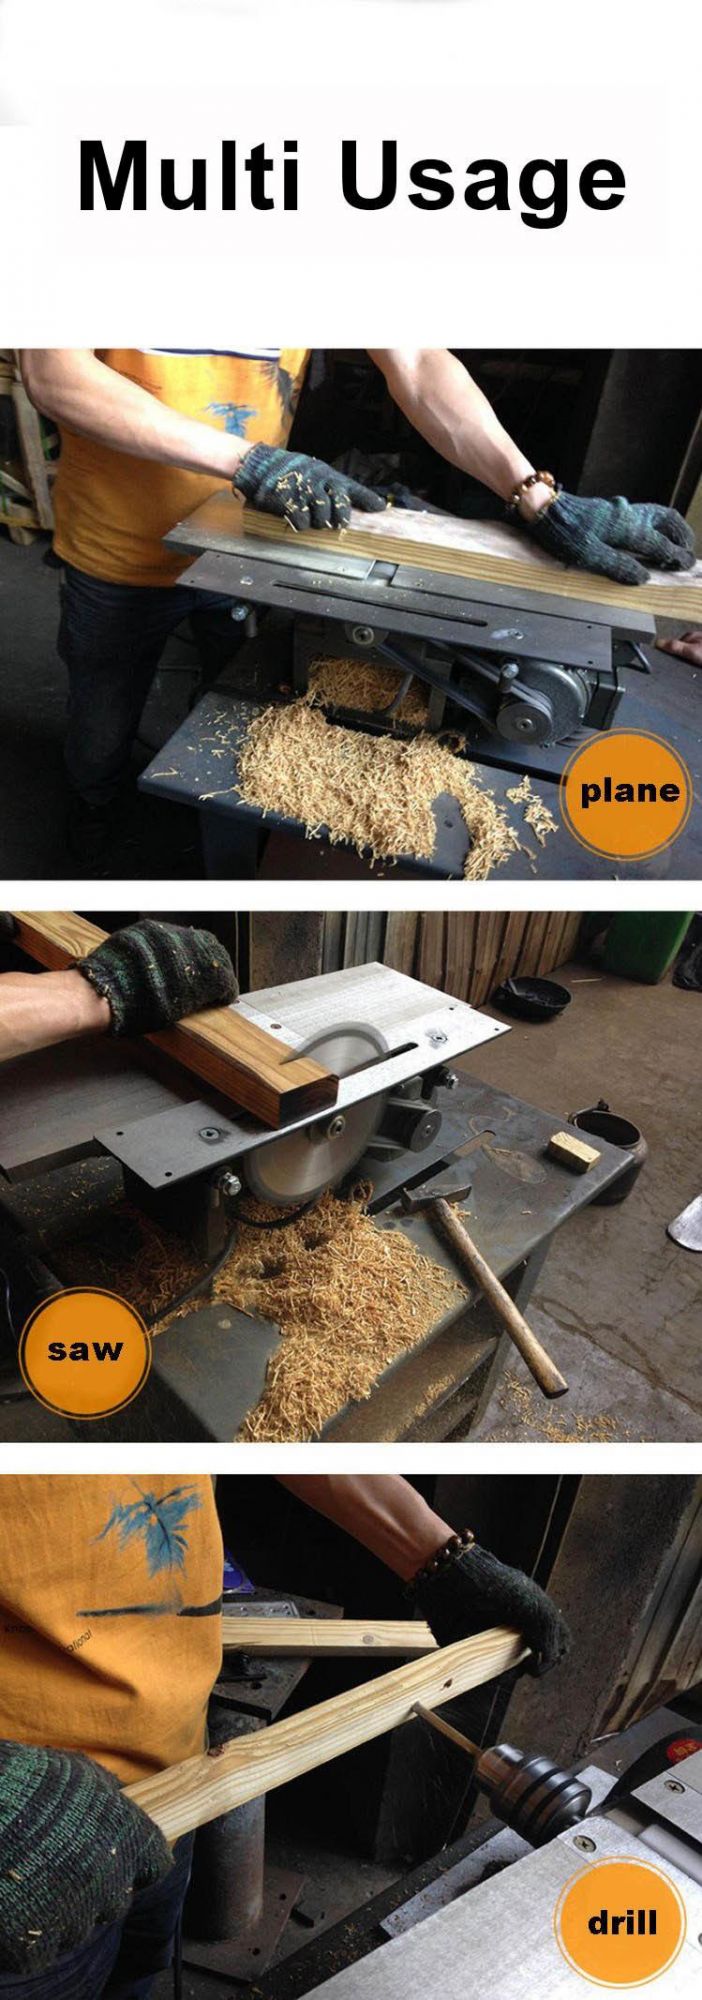 Multi-Function Wood Working Machine for Cutting Planing Drilling